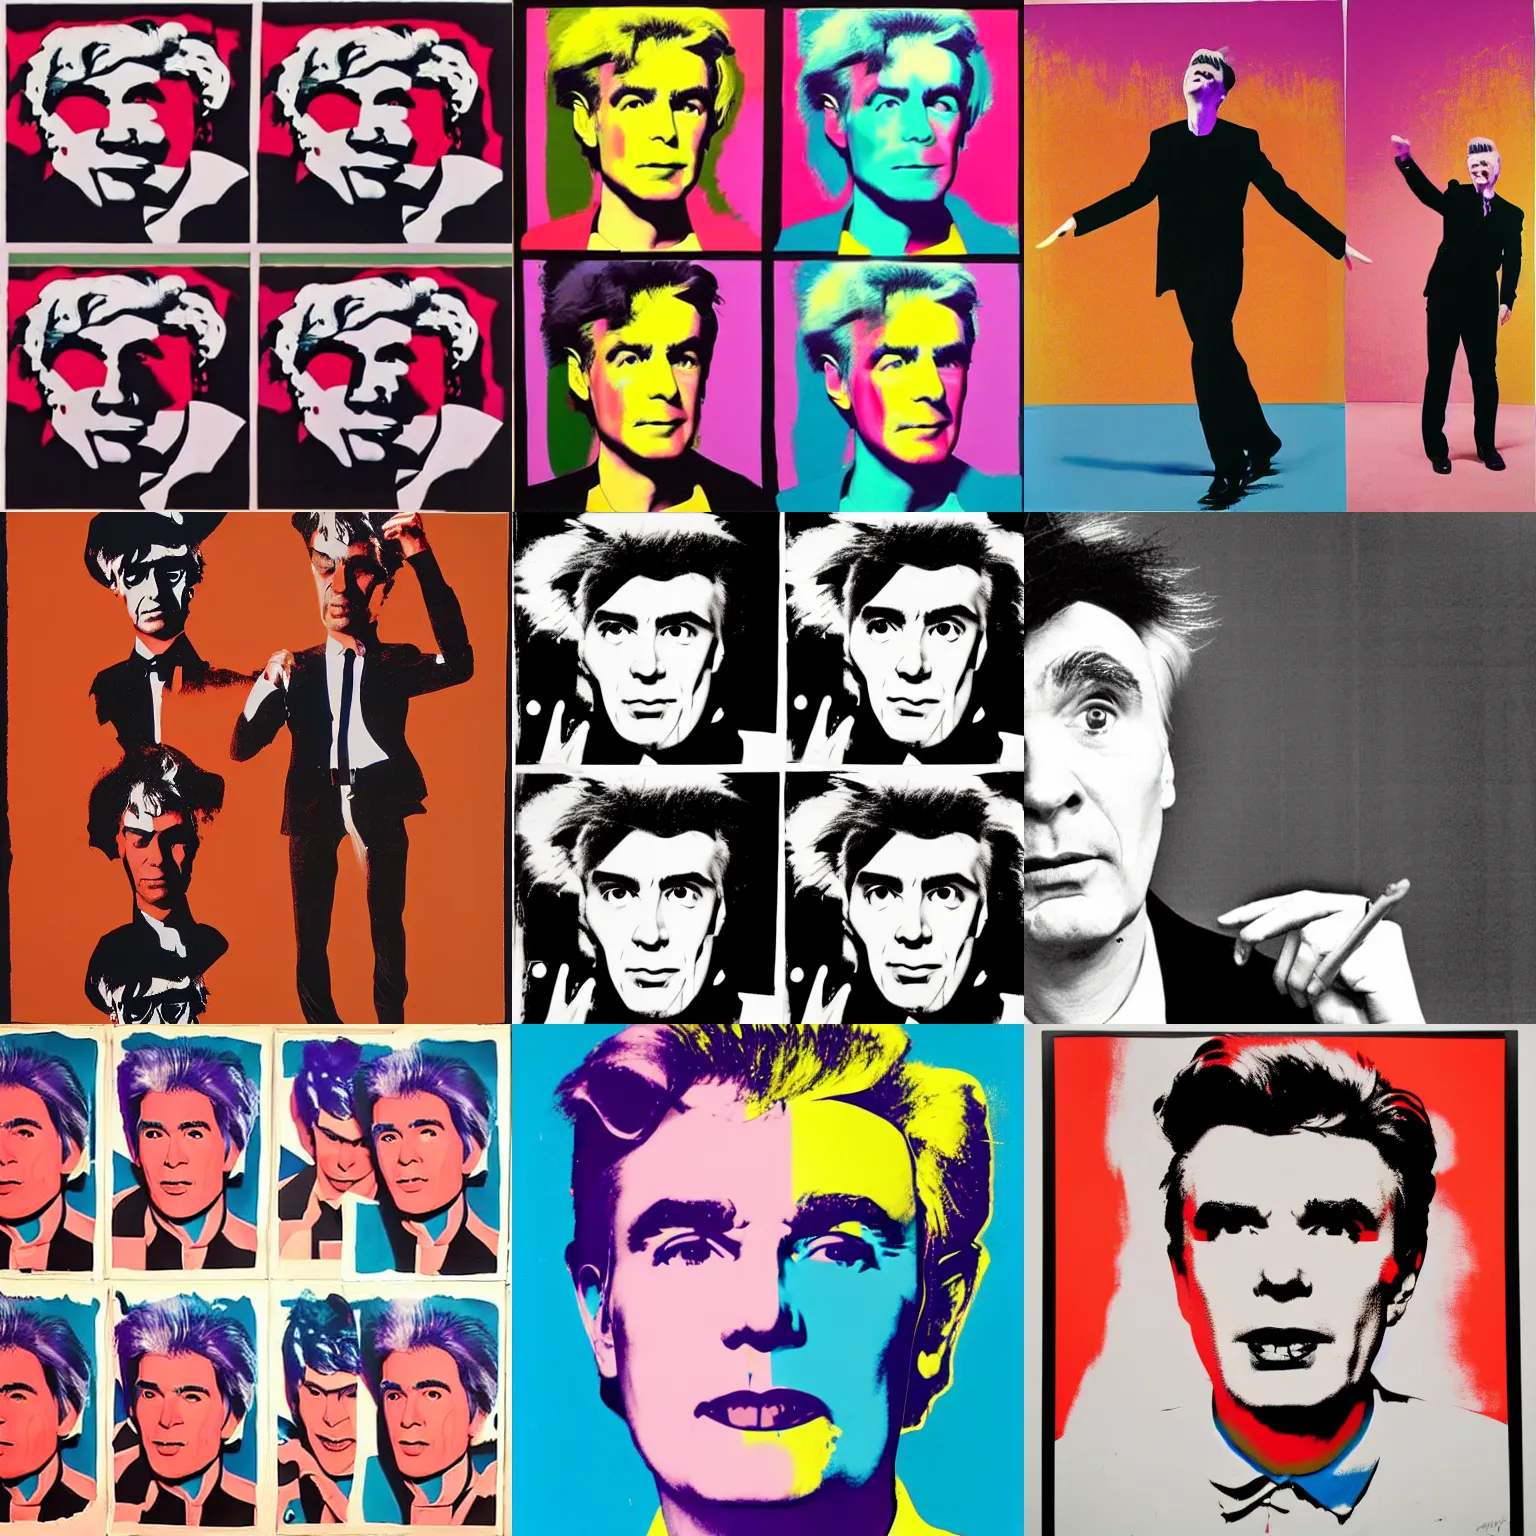 Prompt: david byrne dancing around the room, painted by andy warhol